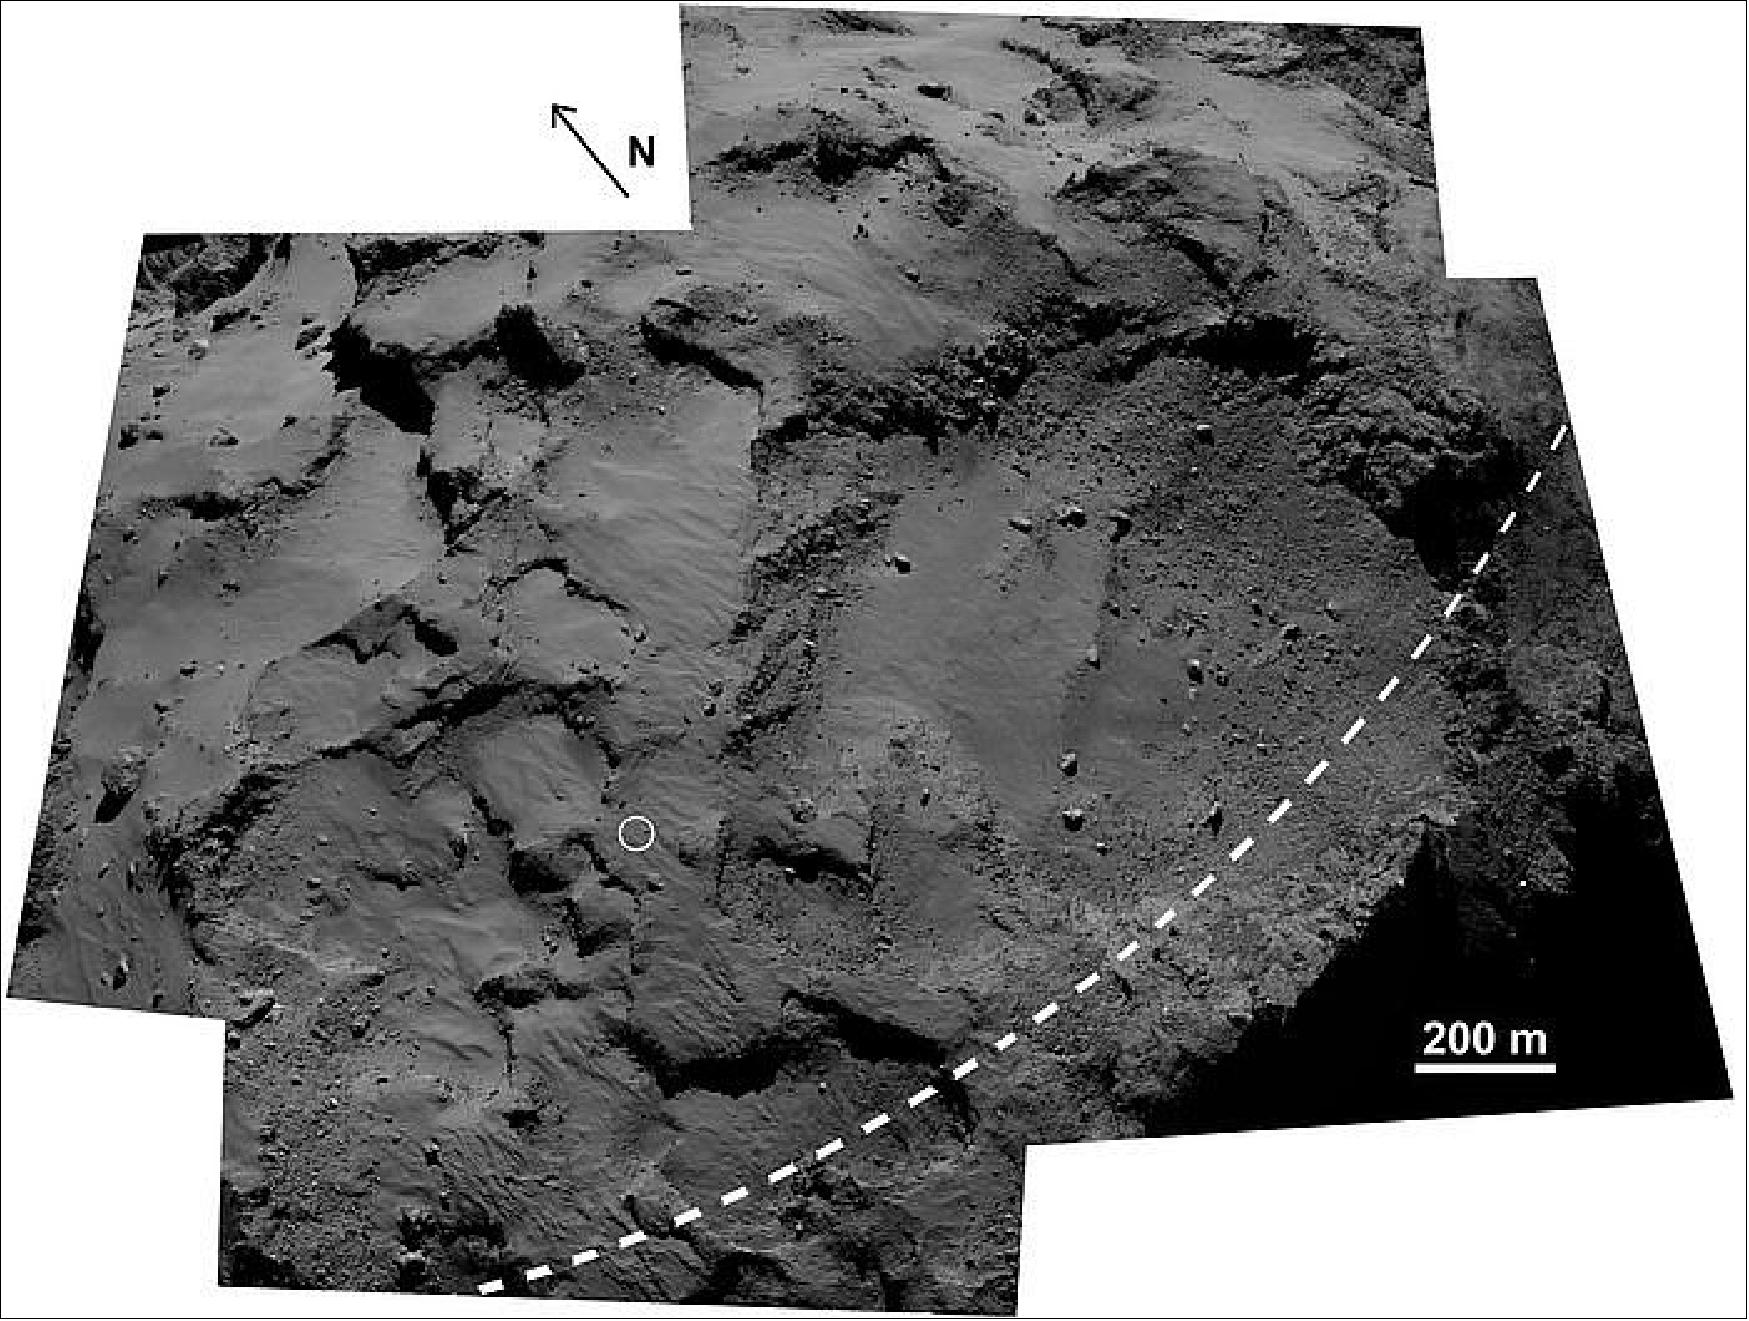 Figure 120: The area surrounding Philae’s first touchdown point, Agilkia (circled) on comet 67P/Churyumov–Gerasimenko. The large depression is the Hatmehit region. The dashed line marks the comet’s equator. This image is a composite of five frames from the OSIRIS narrow-angle camera (image credit: ESA/Rosetta/MPS for OSIRIS Team MPS/UPD/LAM/IAA/SSO/INTA/UPM/DASP/IDA)